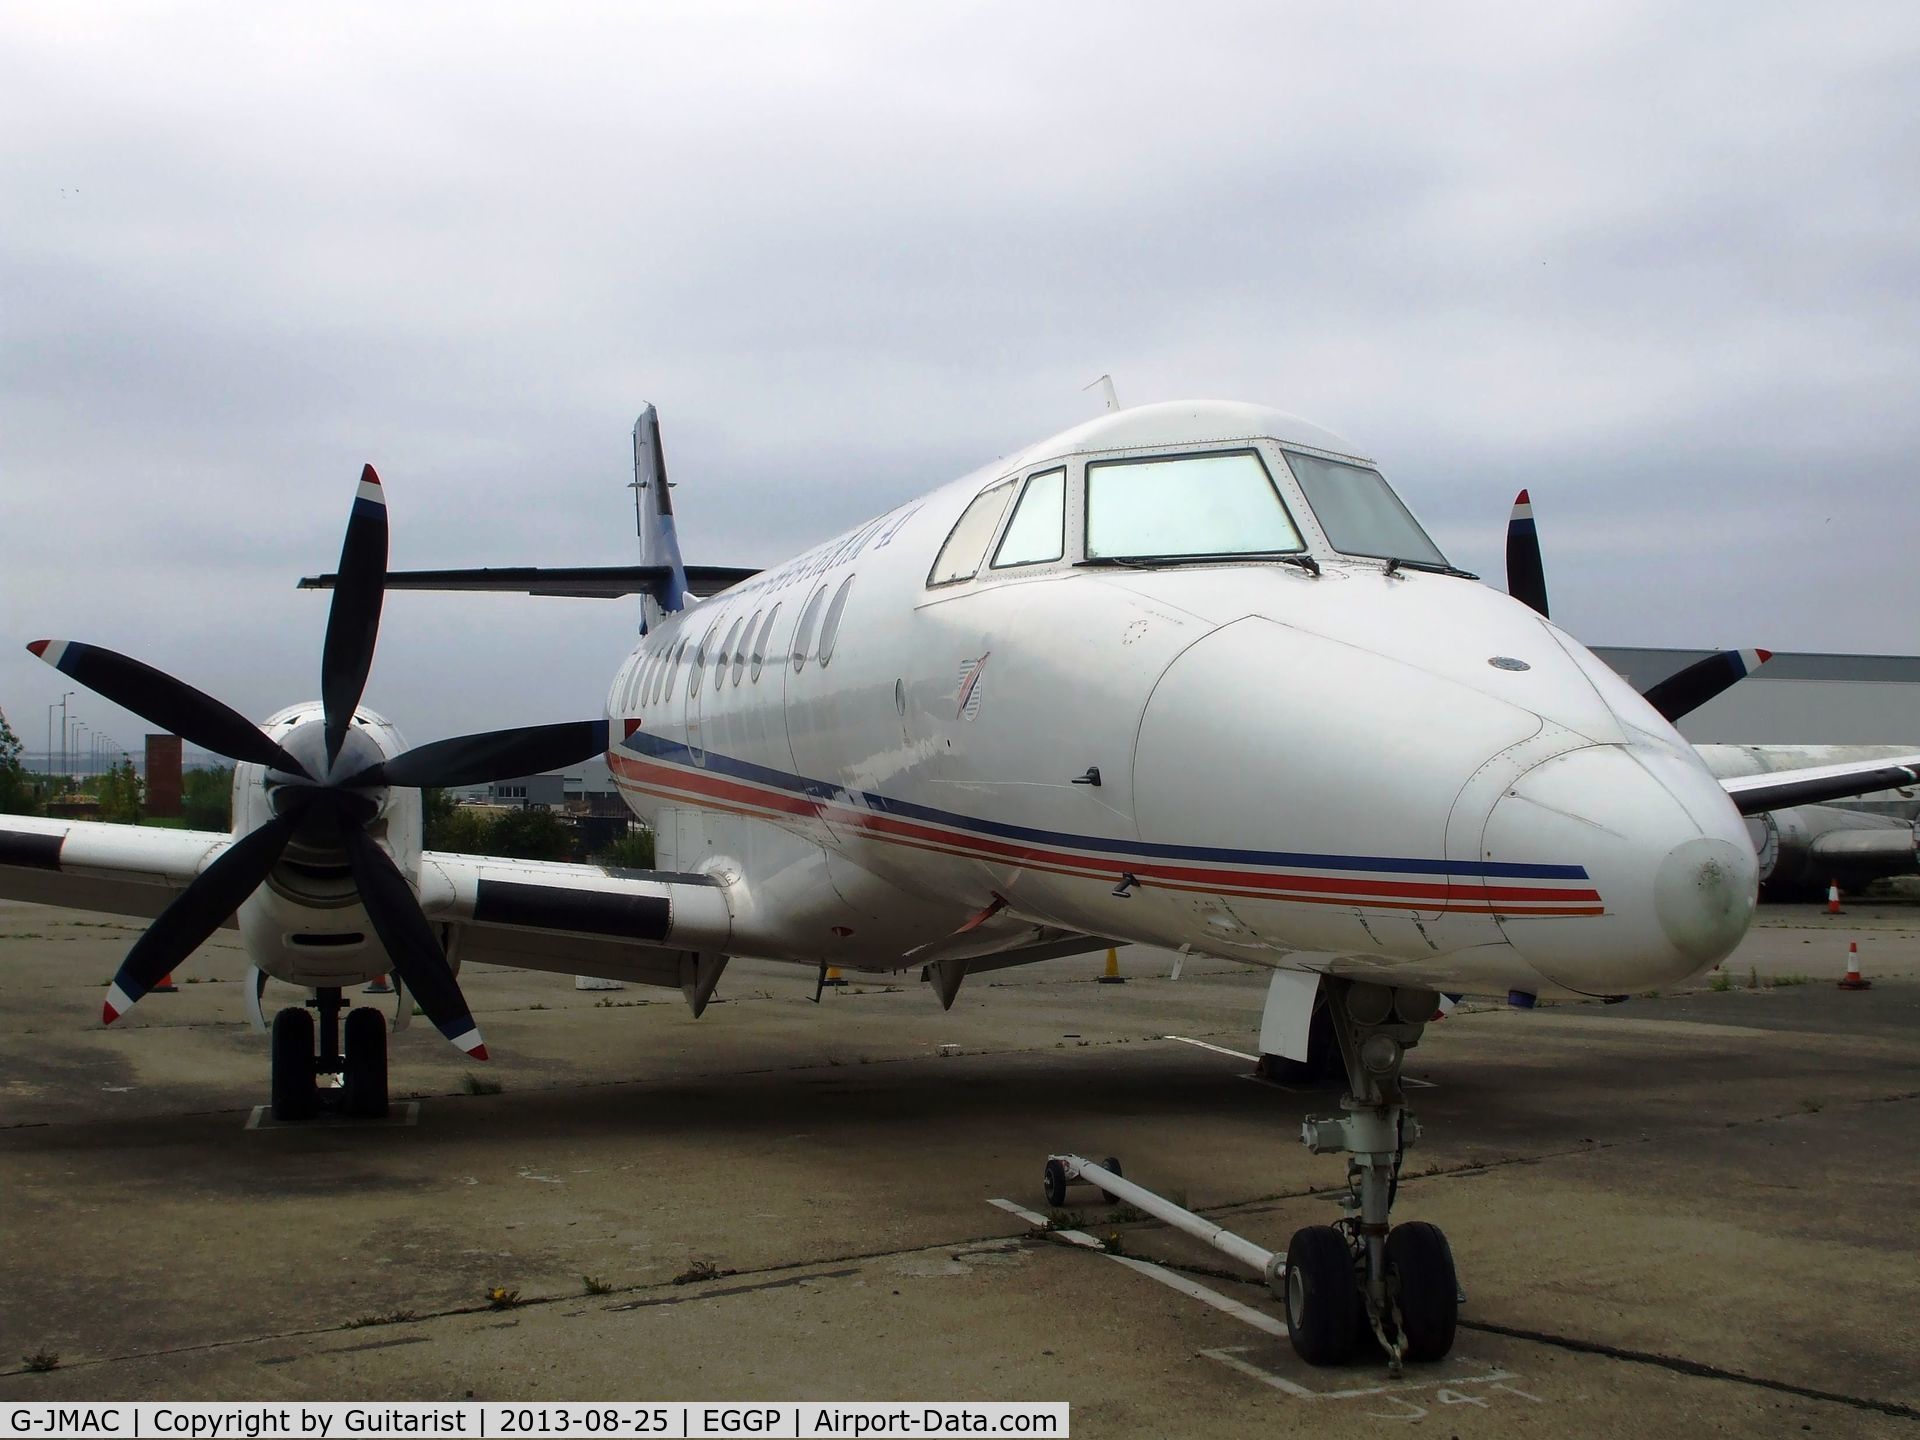 G-JMAC, 1992 British Aerospace Jetstream 41 C/N 41004, Looks in quite good condition for a 21 yesr old